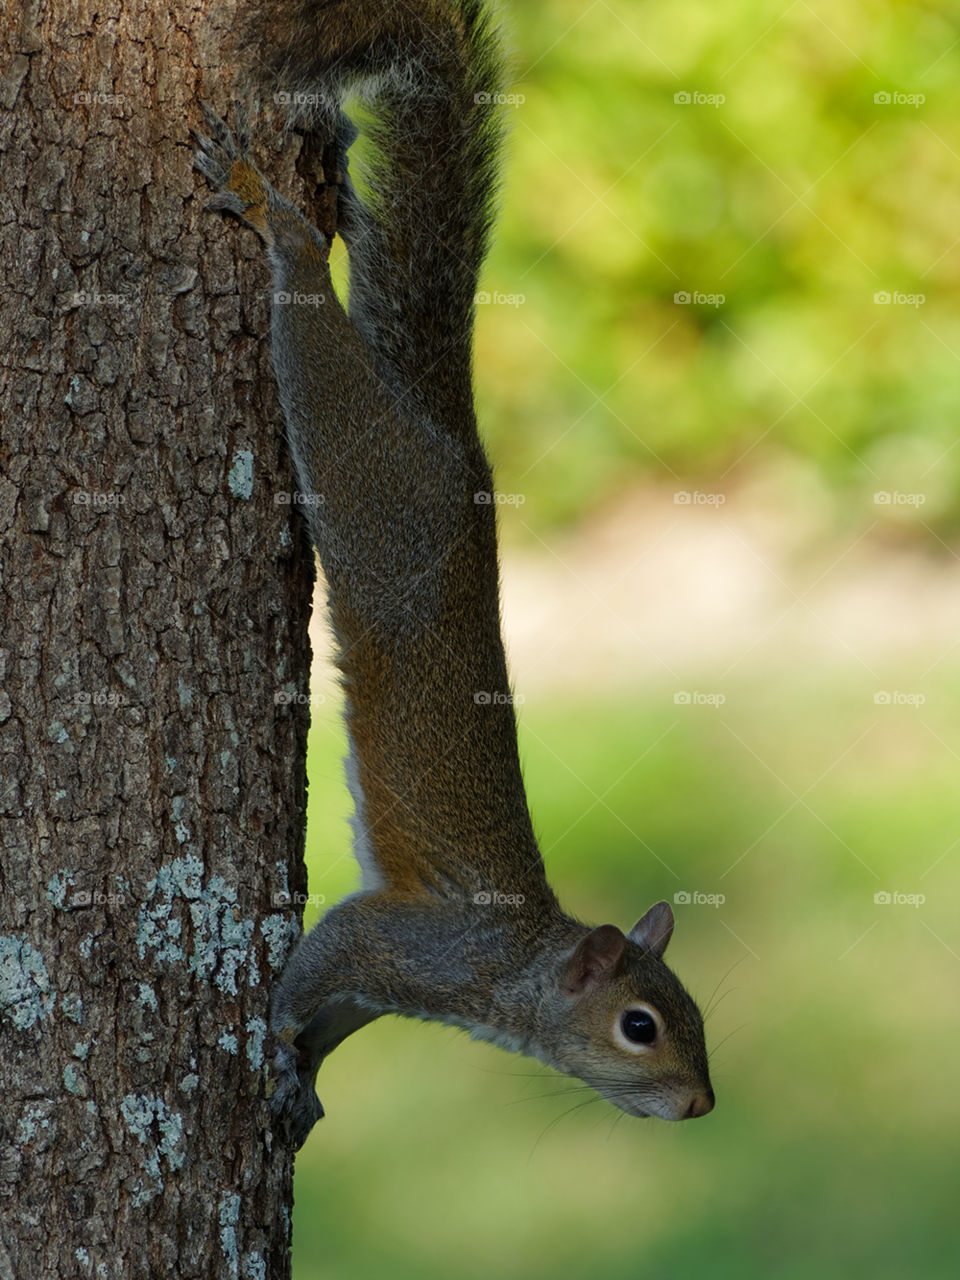 Eastern Gray Squirrel fully stretched out, coming down a tree trunk, head first. profile side view.